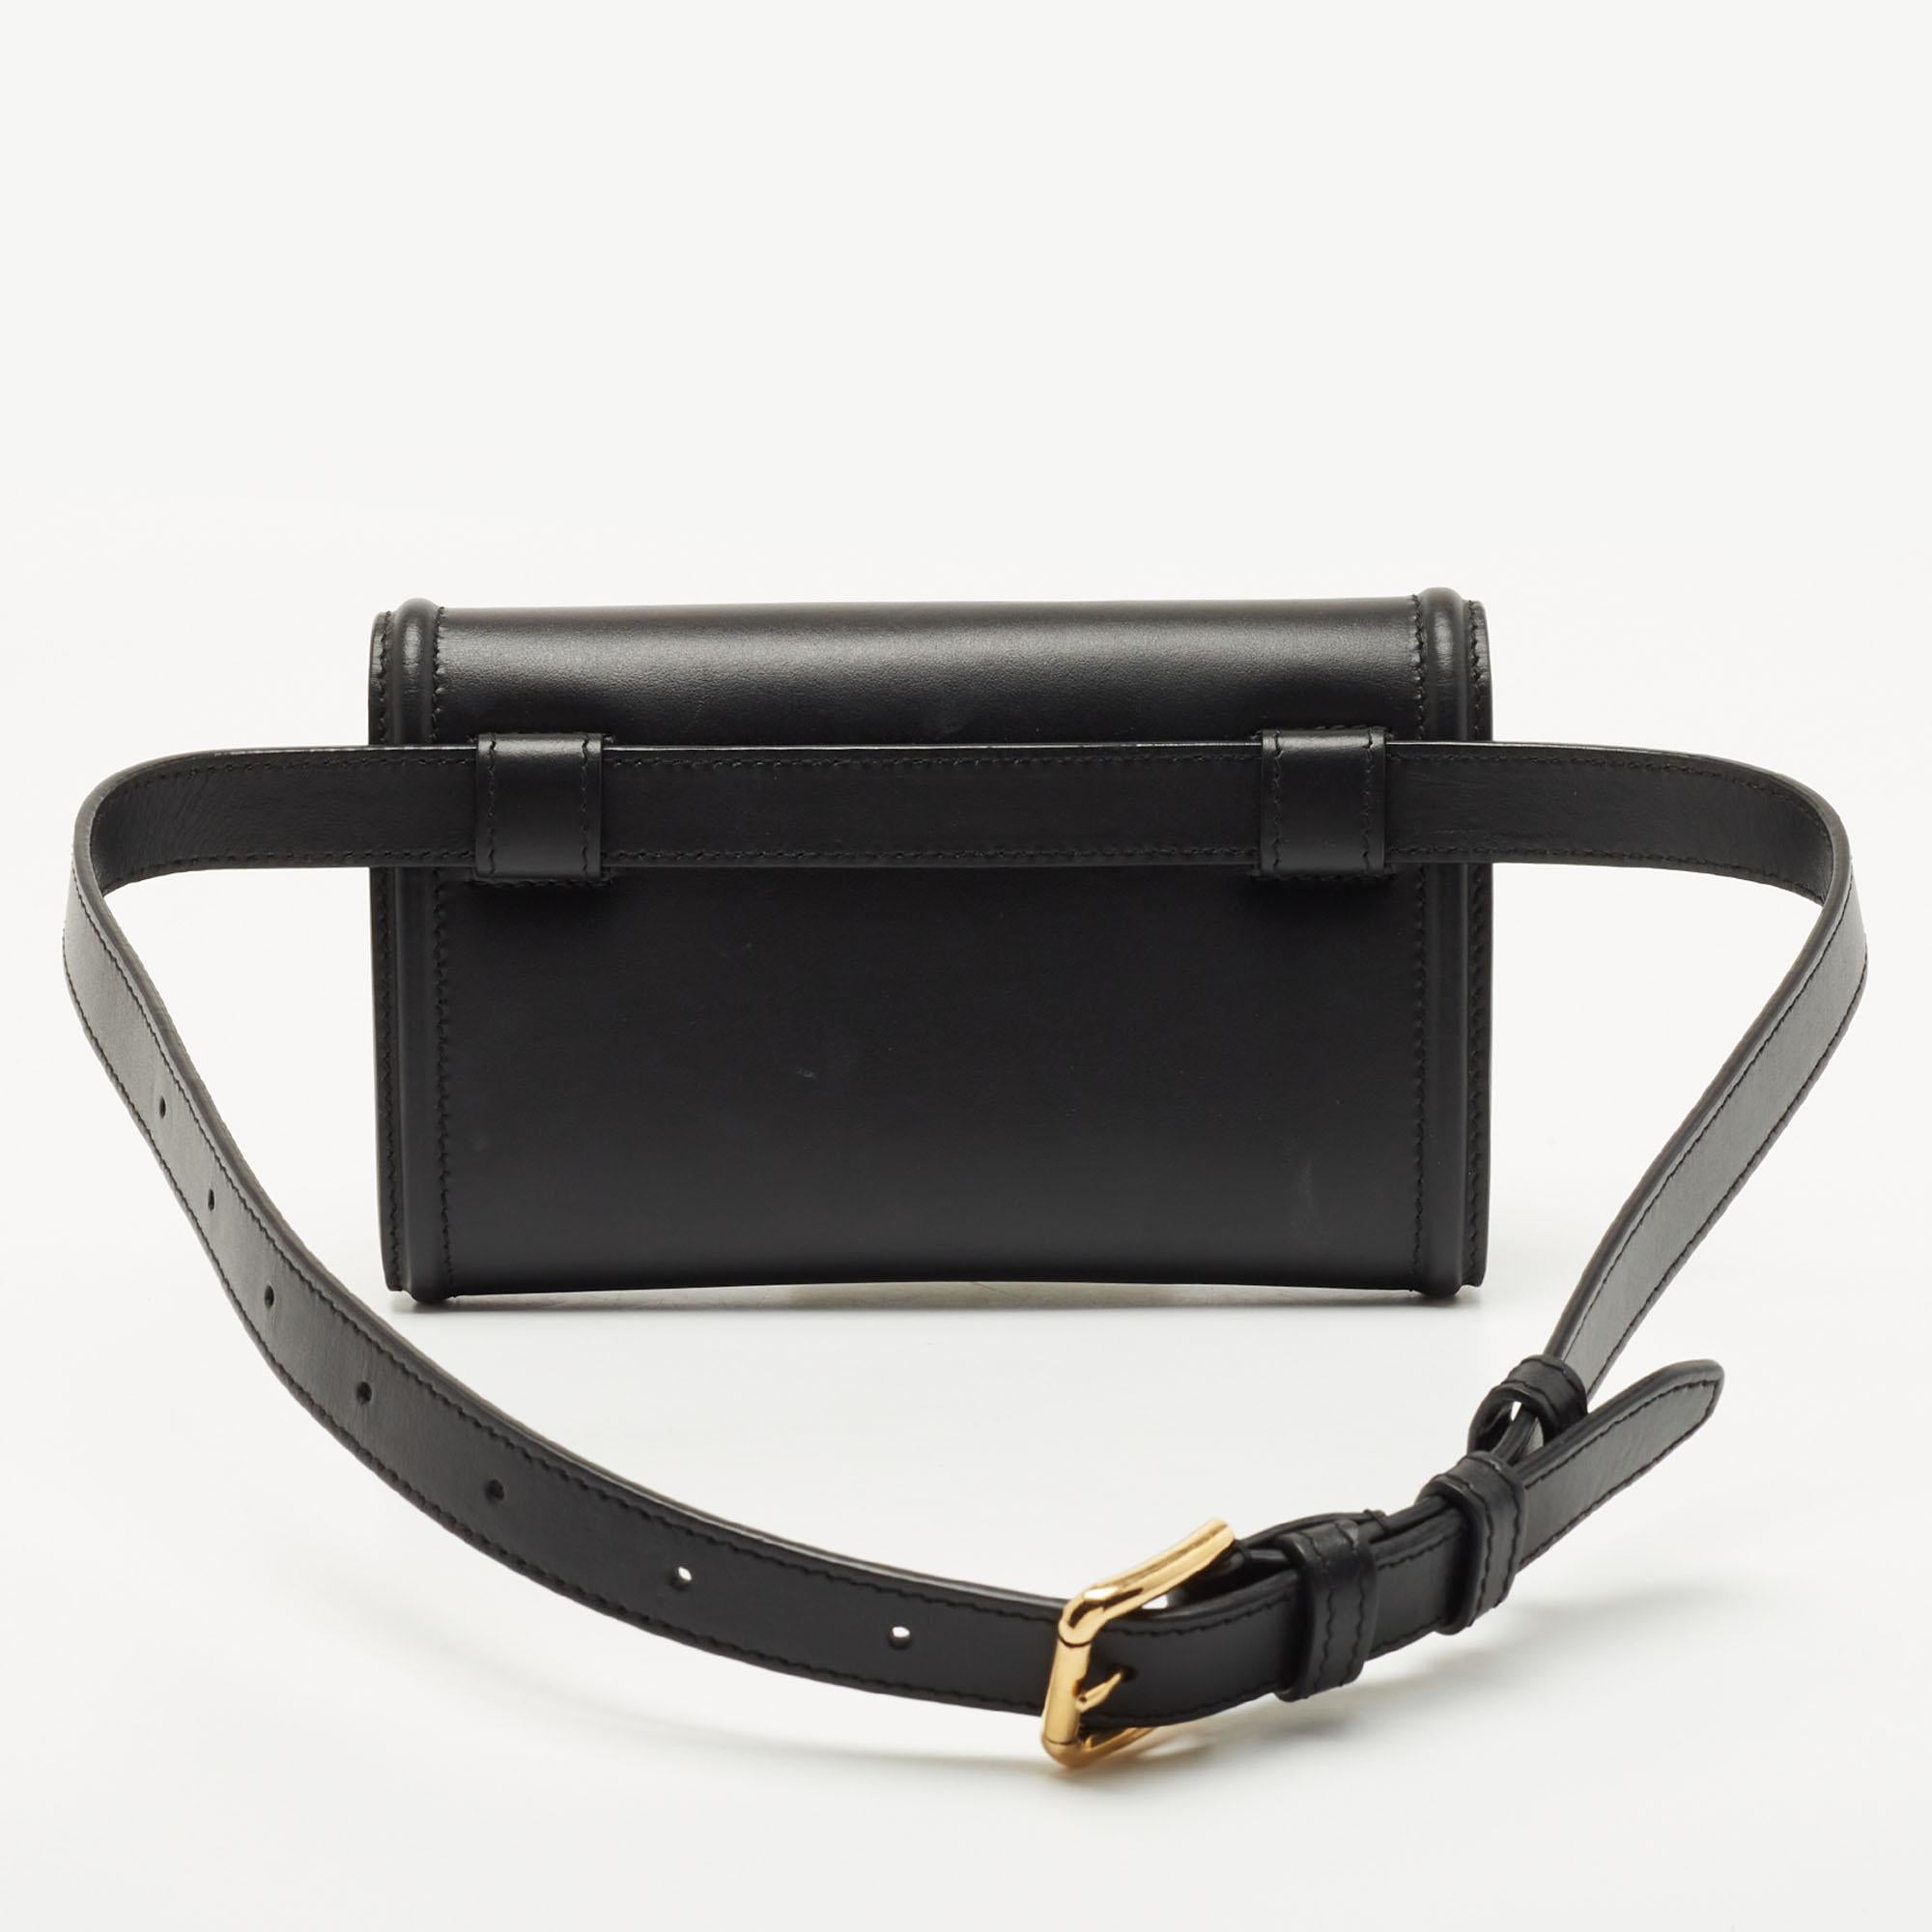 Be a part of the latest trends with this amazing belt bag from Dolce & Gabbana. Crafted with leather, the black bag comes with a front flap featuring the gold-tone Devotion heart motif. Equipped with a roomy leather-lined interior and an adjustable